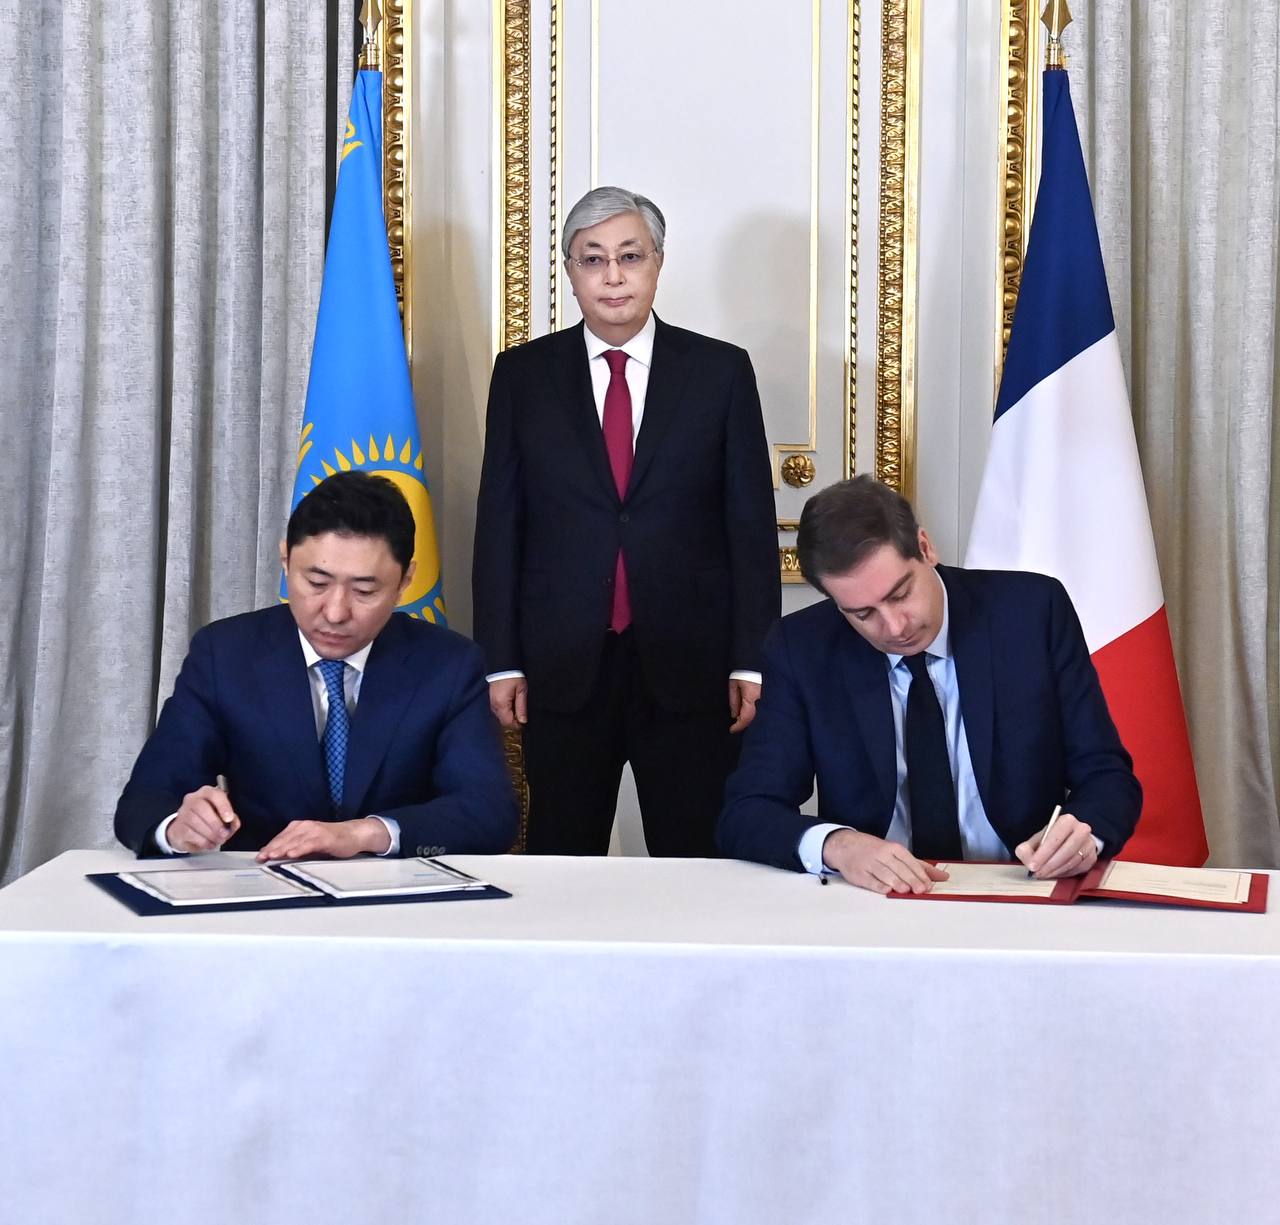 The Government of the Republic of Kazakhstan signed a Specific Agreement with the Government of the French Republic on the implementation of cooperation in the field of combating global warming